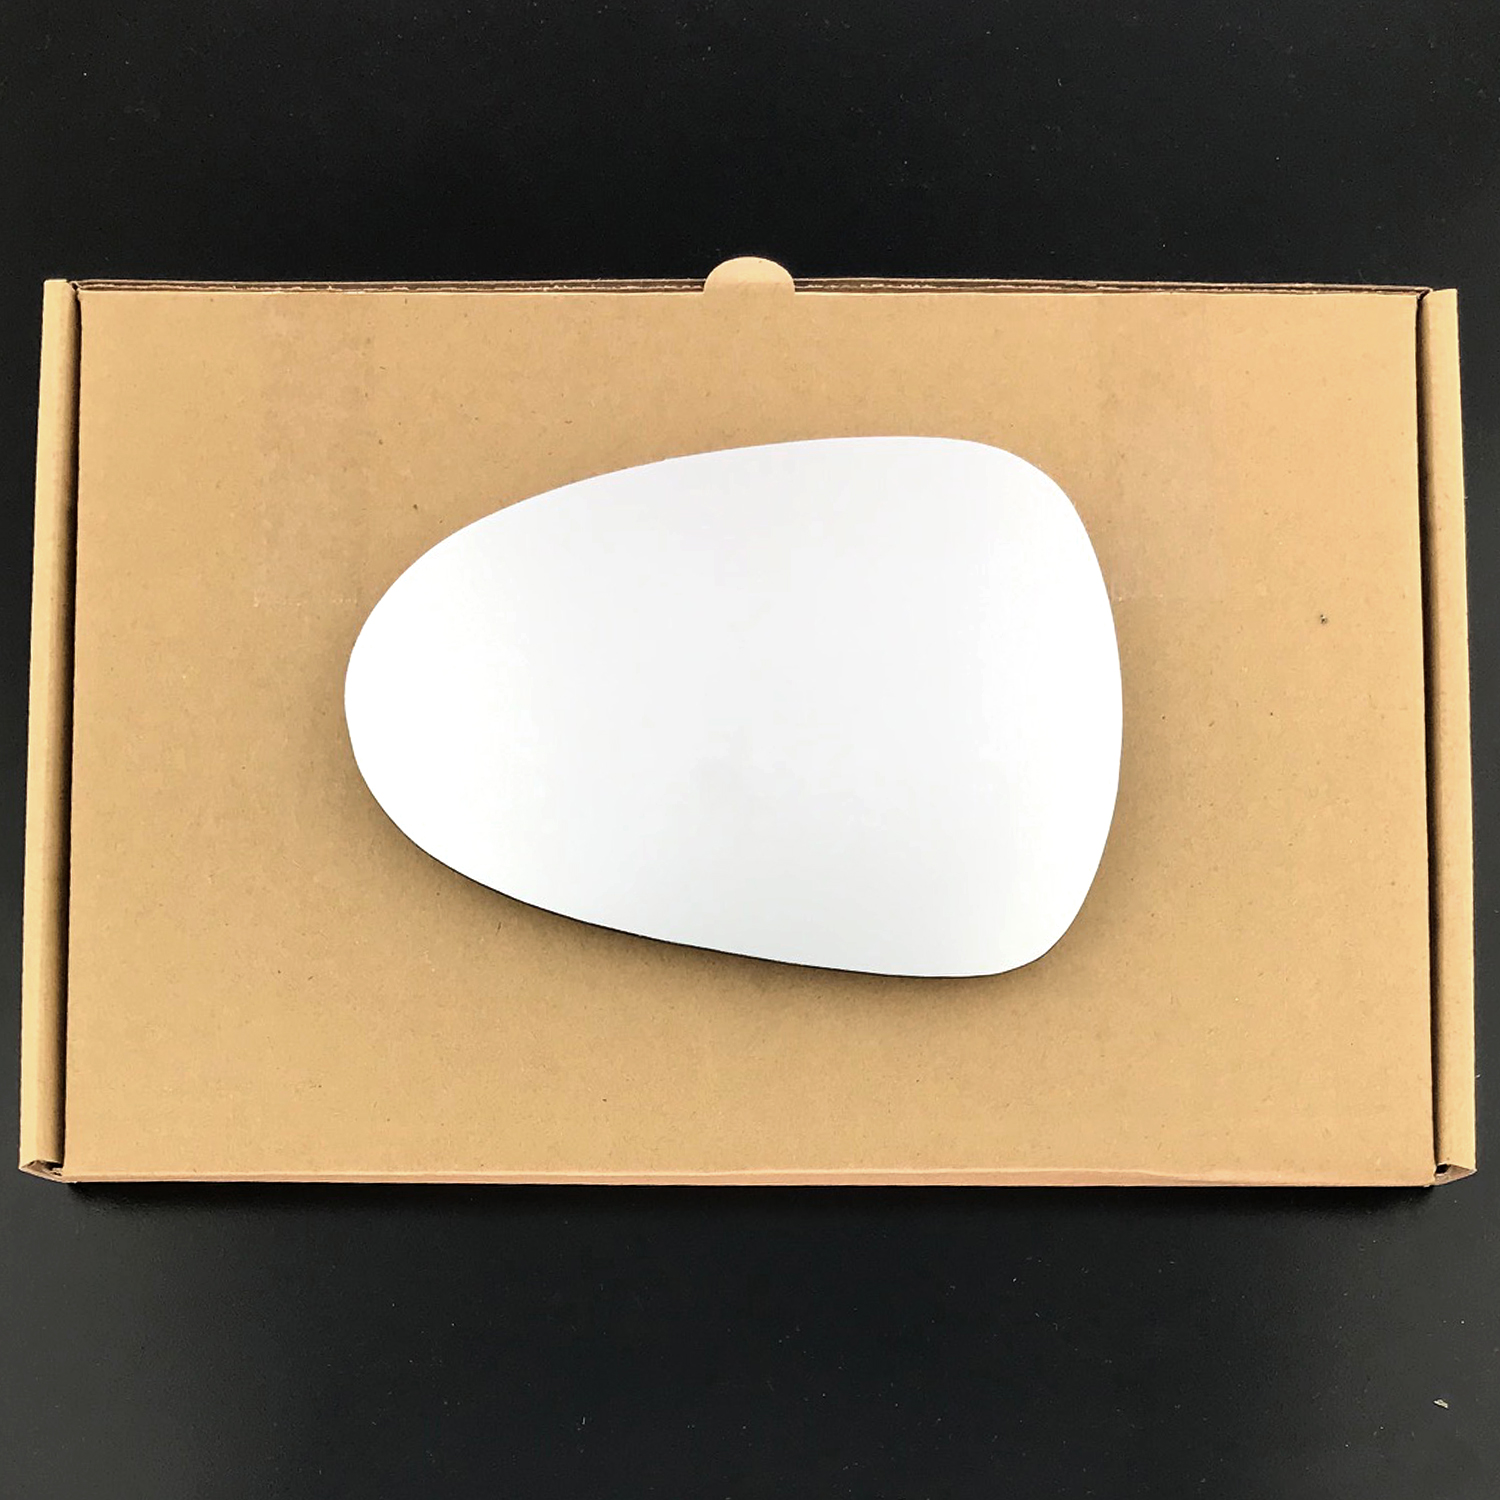 SEAT Ibiza Wing Mirror Glass LEFT HAND ( UK Passenger Side ) 2008 SEP to 2018 – Convex Wing Mirror